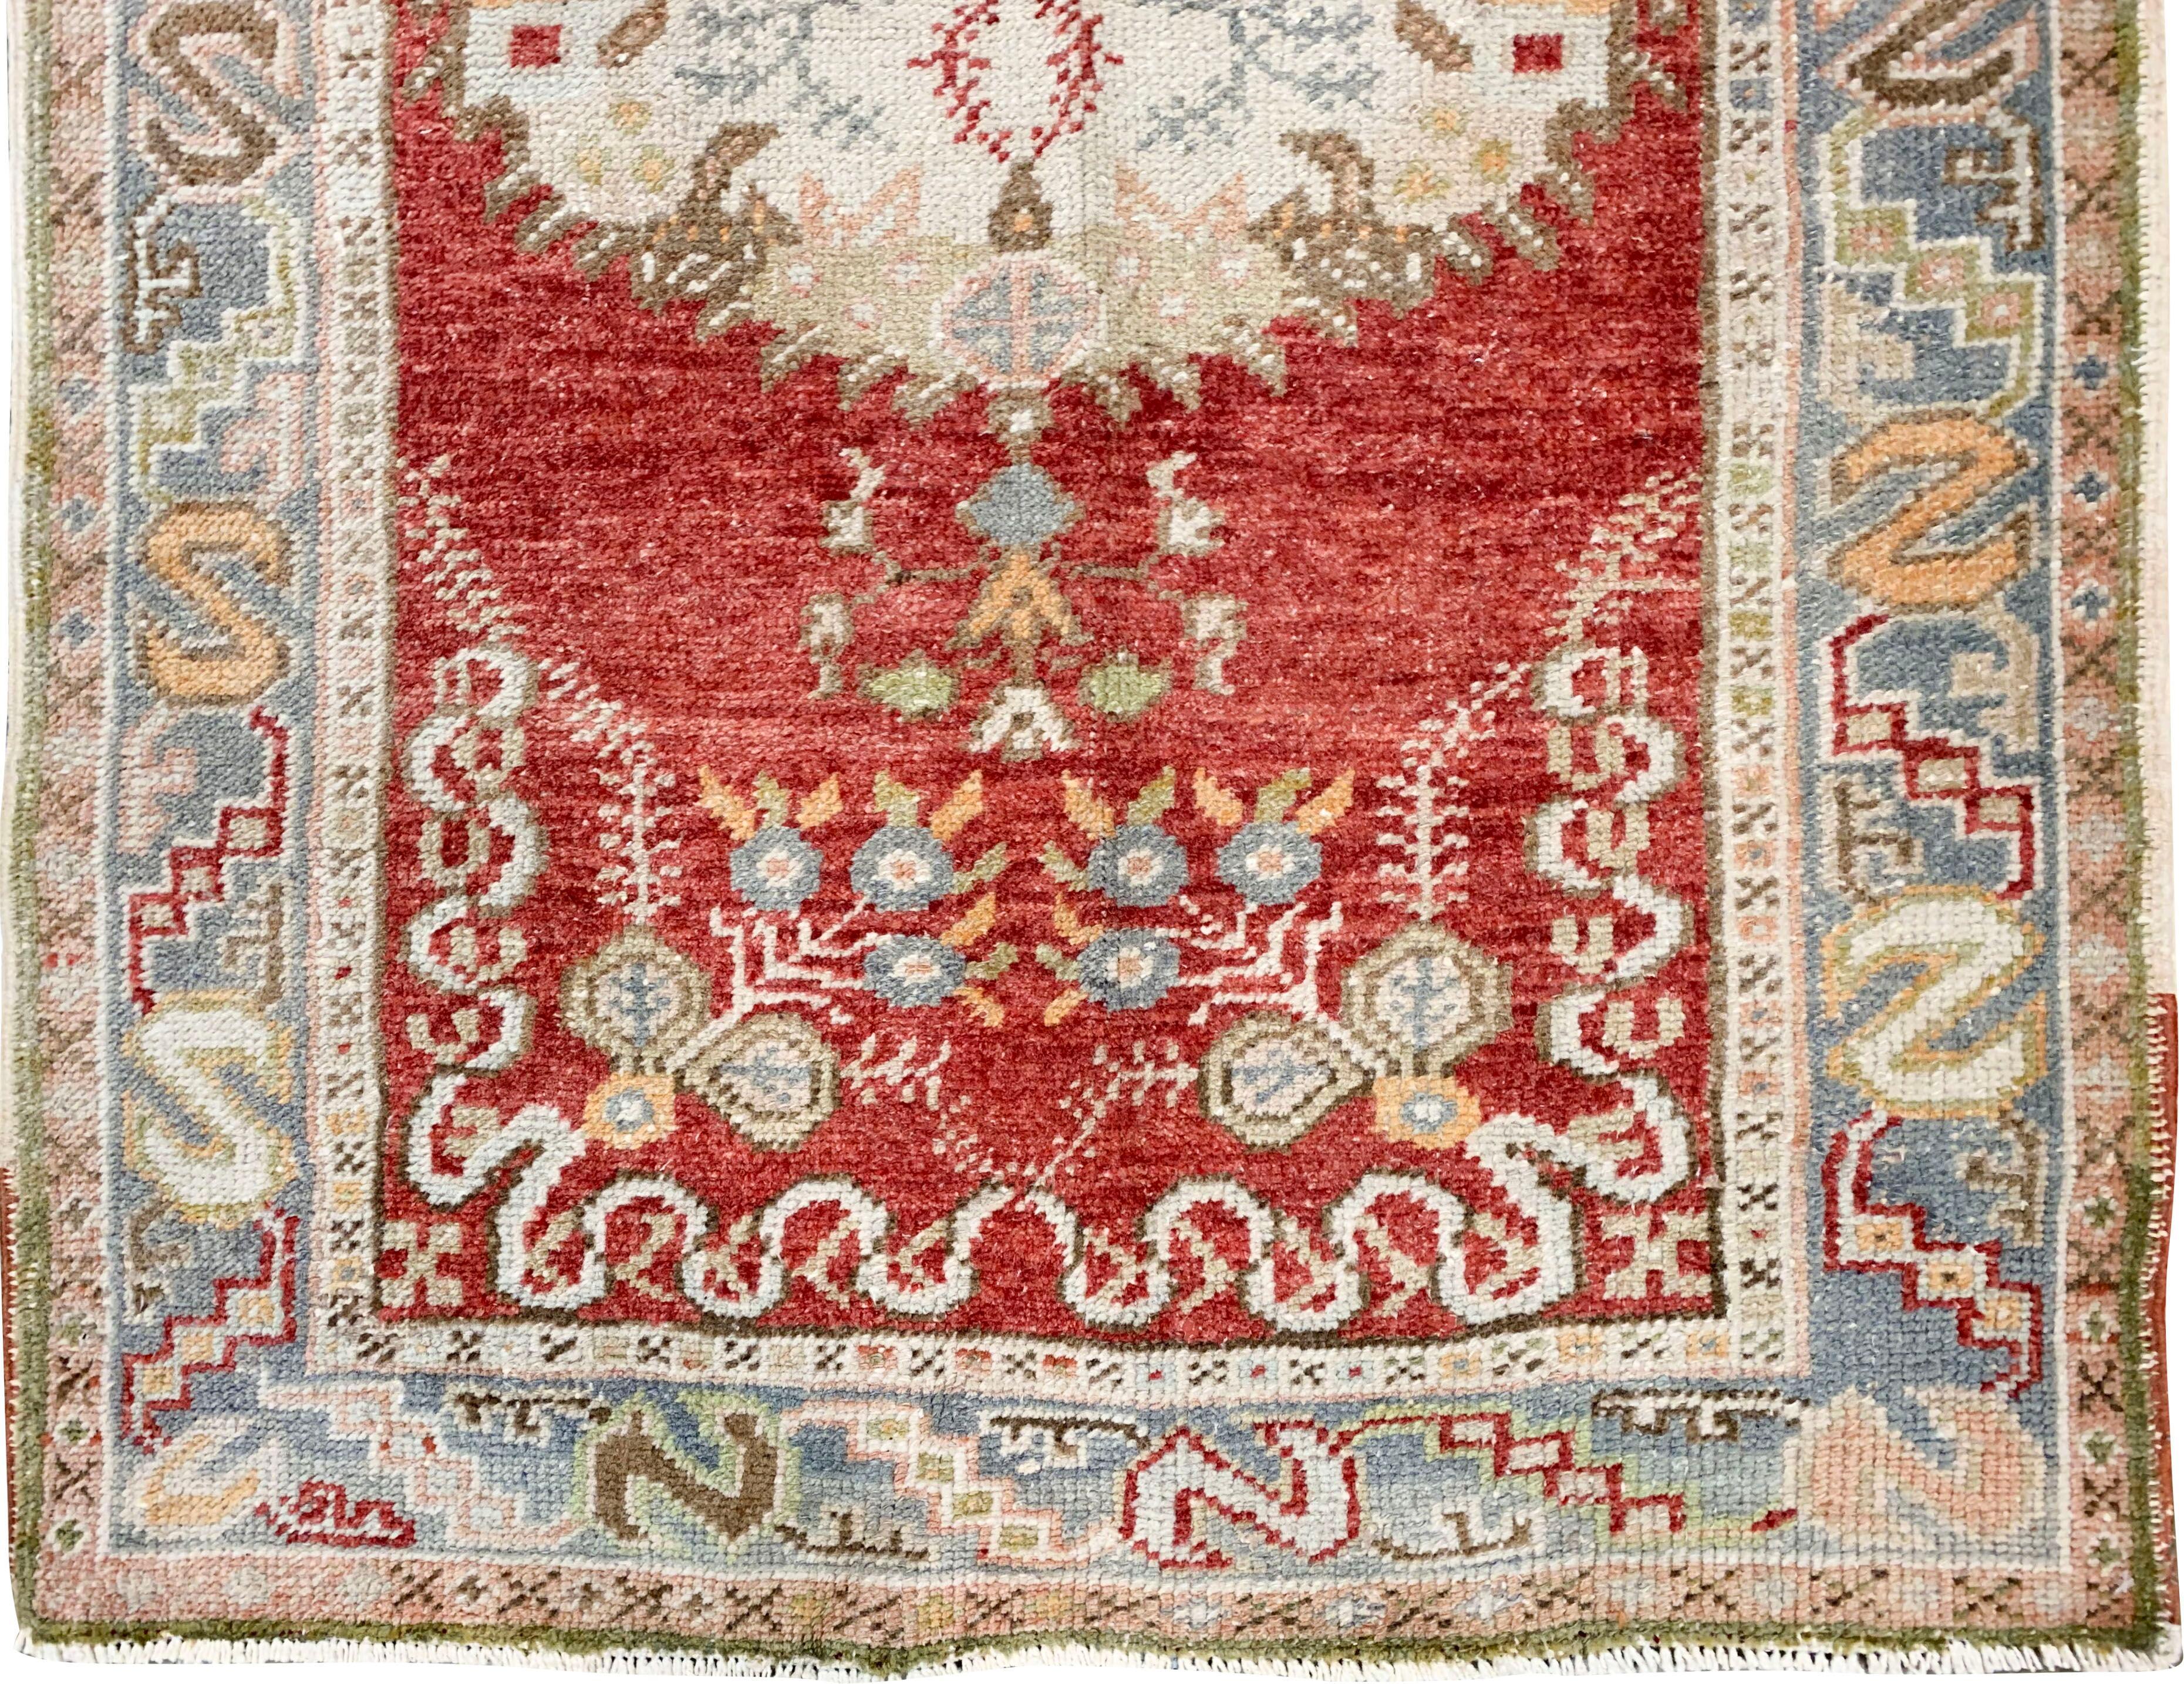 Vintage Turkish Oushak Runner Rug, 2'11 x 11' In Good Condition For Sale In New York, NY